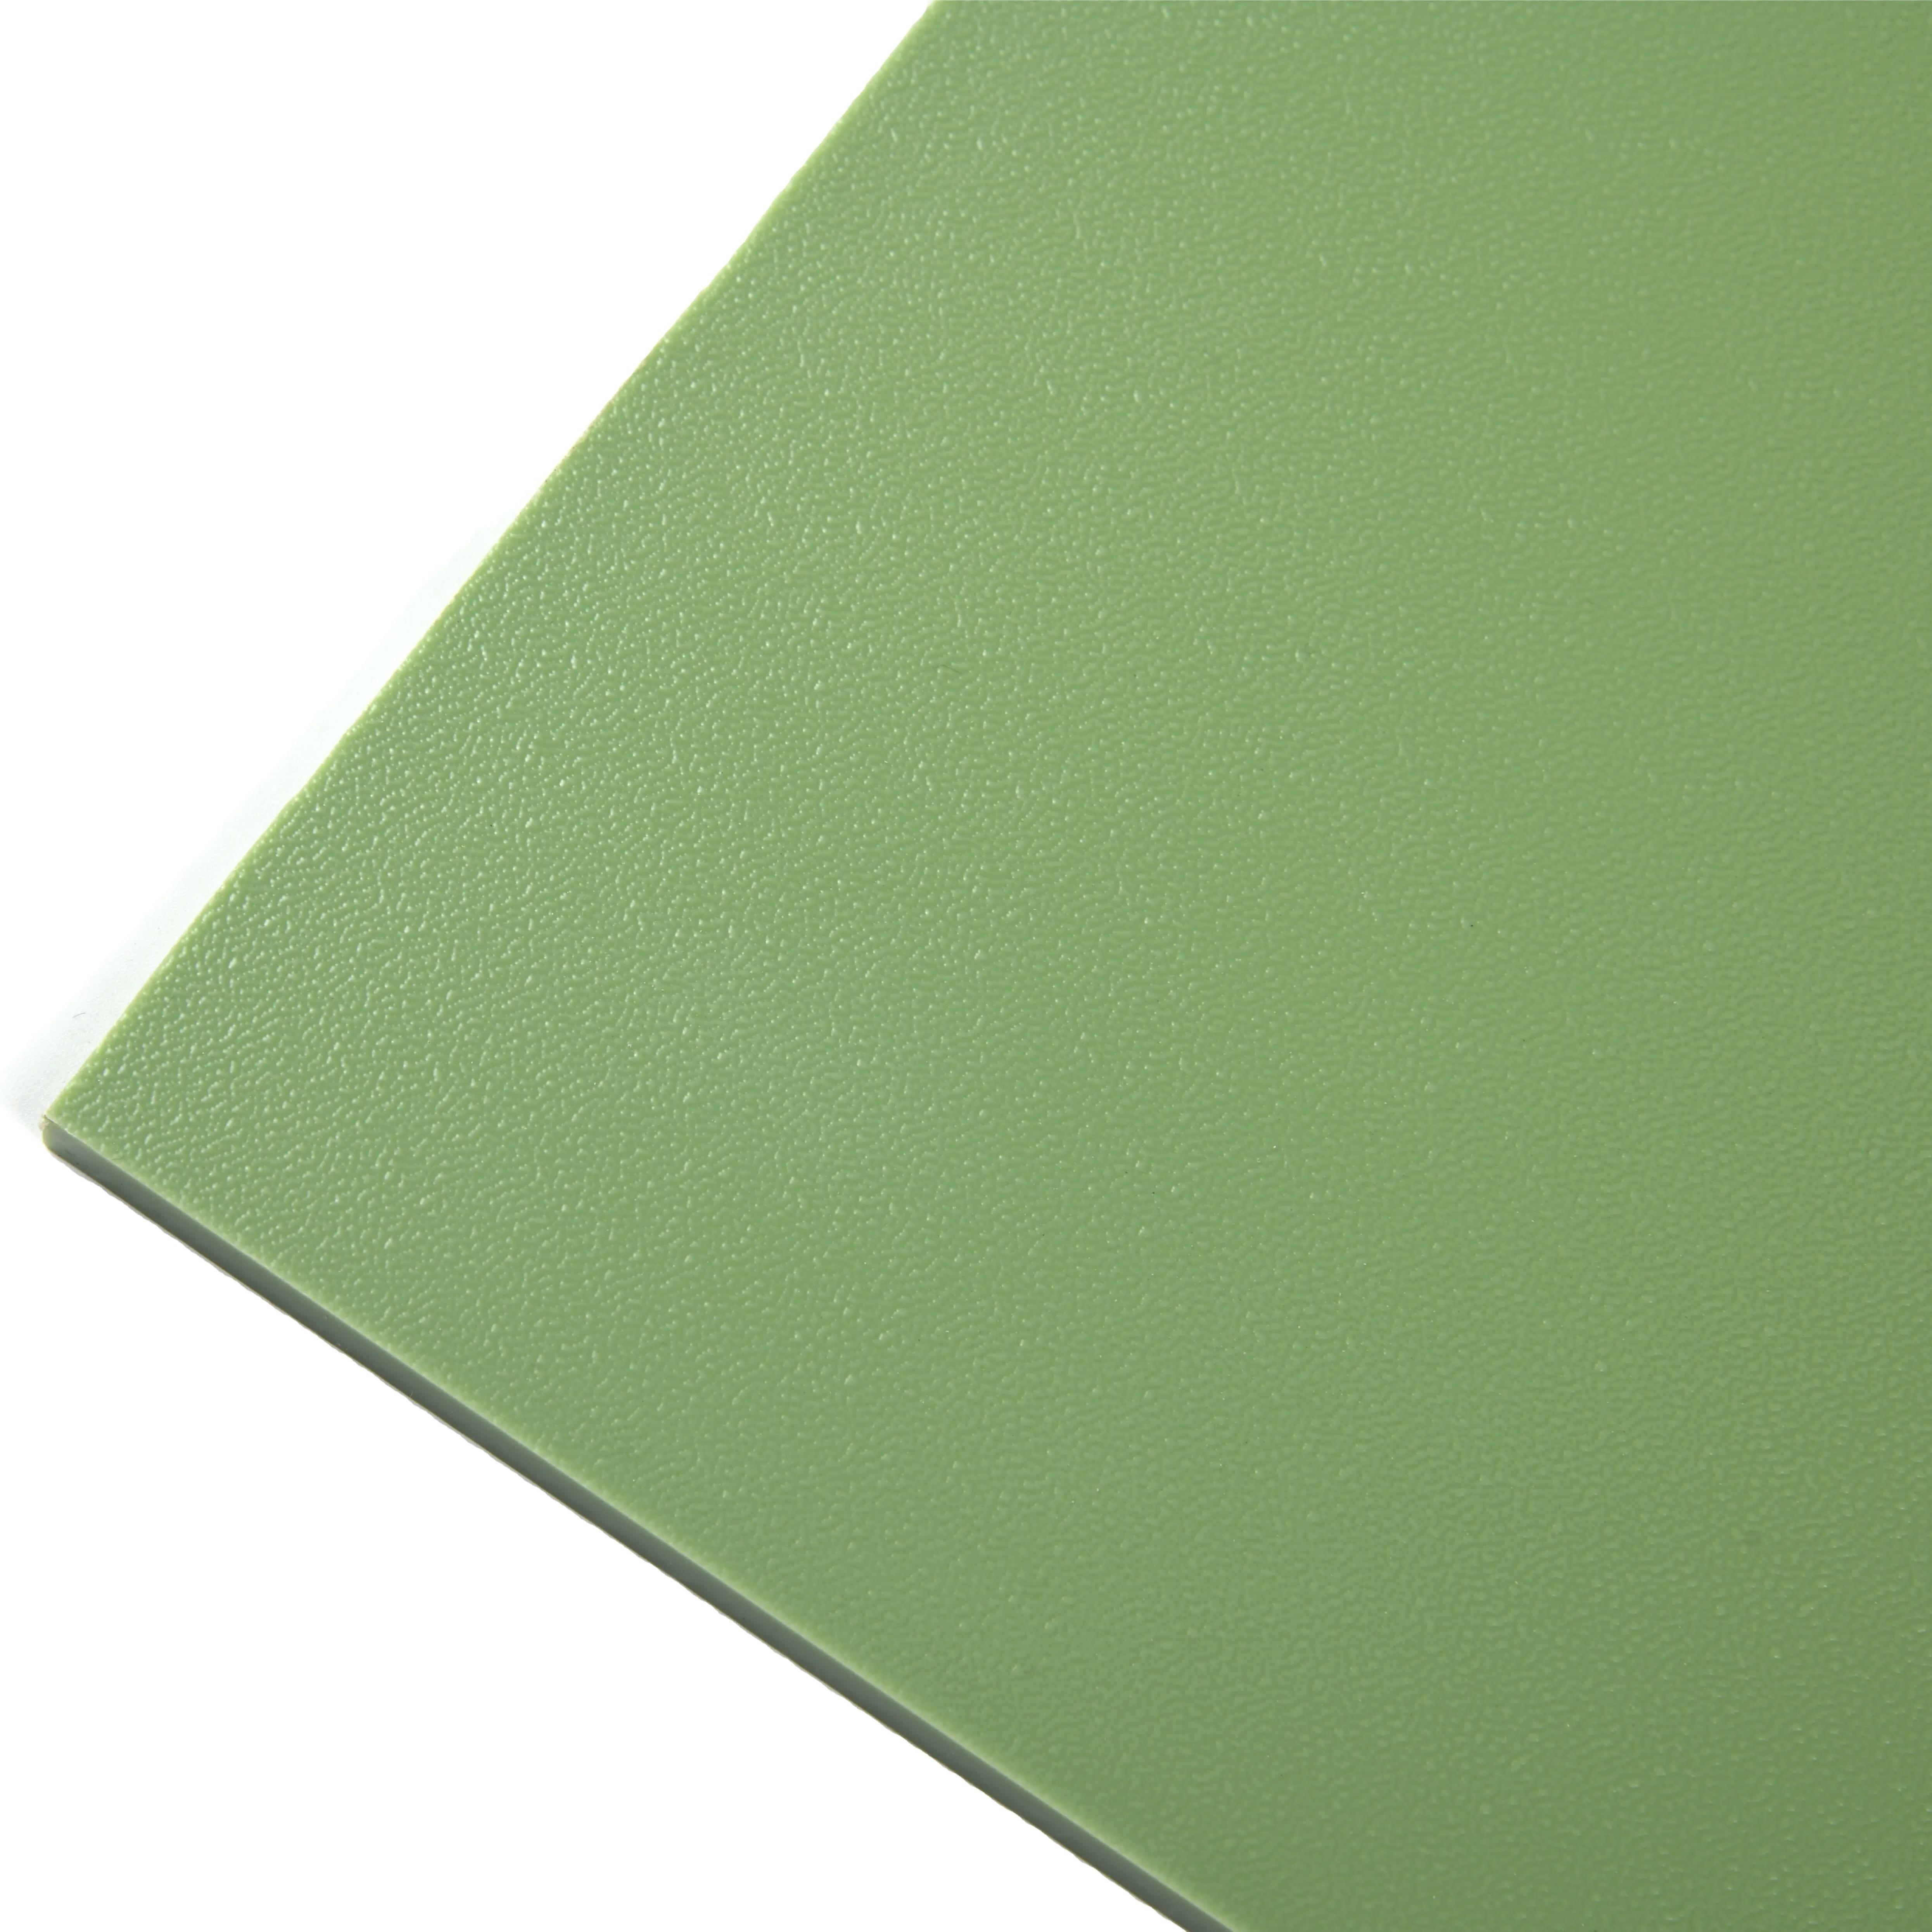 Paidu Skillful Manufacture Plastic Roofing Sheets ABS Texture Sheet For Vacuum Forming For Household Appliances Acrylic Sheet Hips